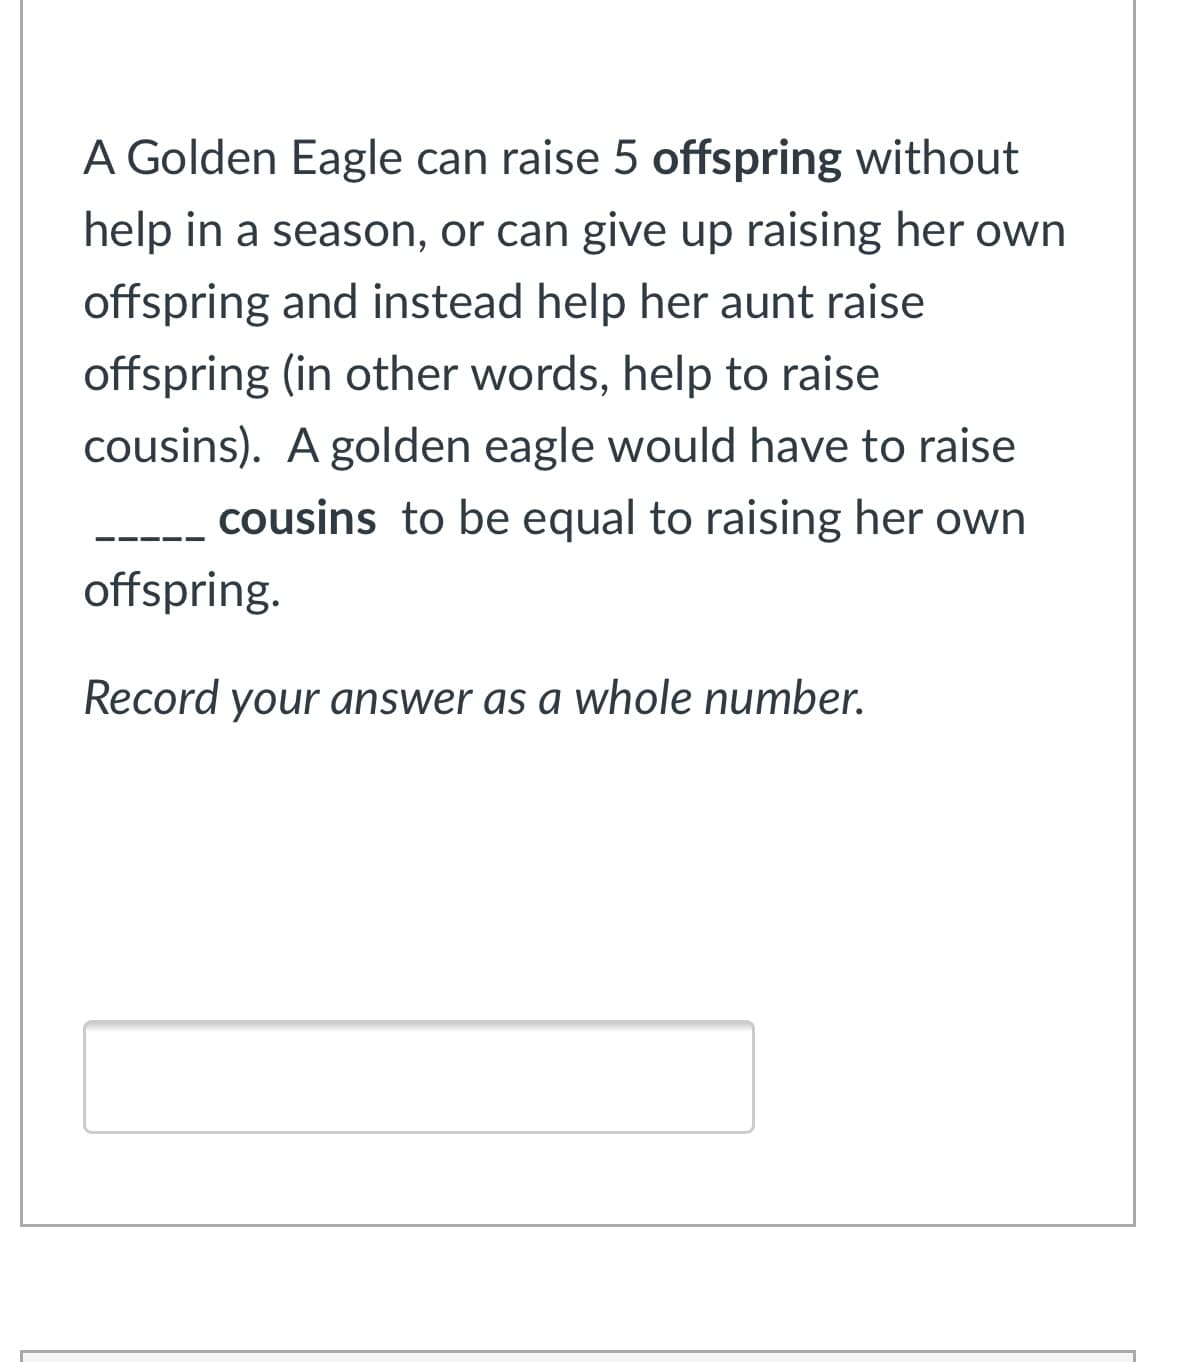 A Golden Eagle can raise 5 offspring without
help in a season, or can give up raising her own
offspring and instead help her aunt raise
offspring (in other words, help to raise
cousins). A golden eagle would have to raise
cousins to be equal to raising her own
offspring.
Record your answer as a whole number.
